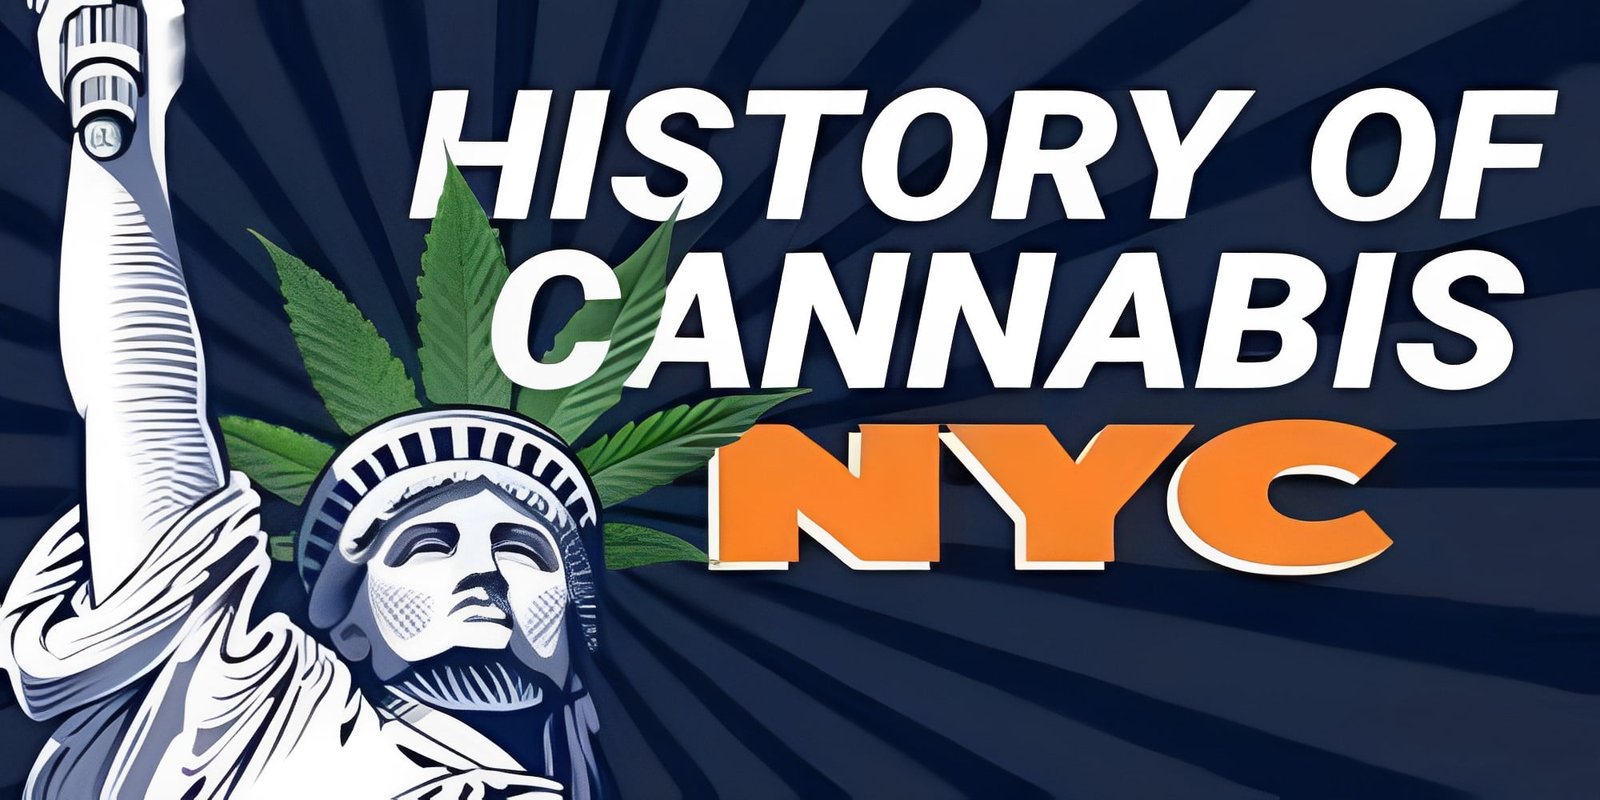 History of Cannabis in NYC